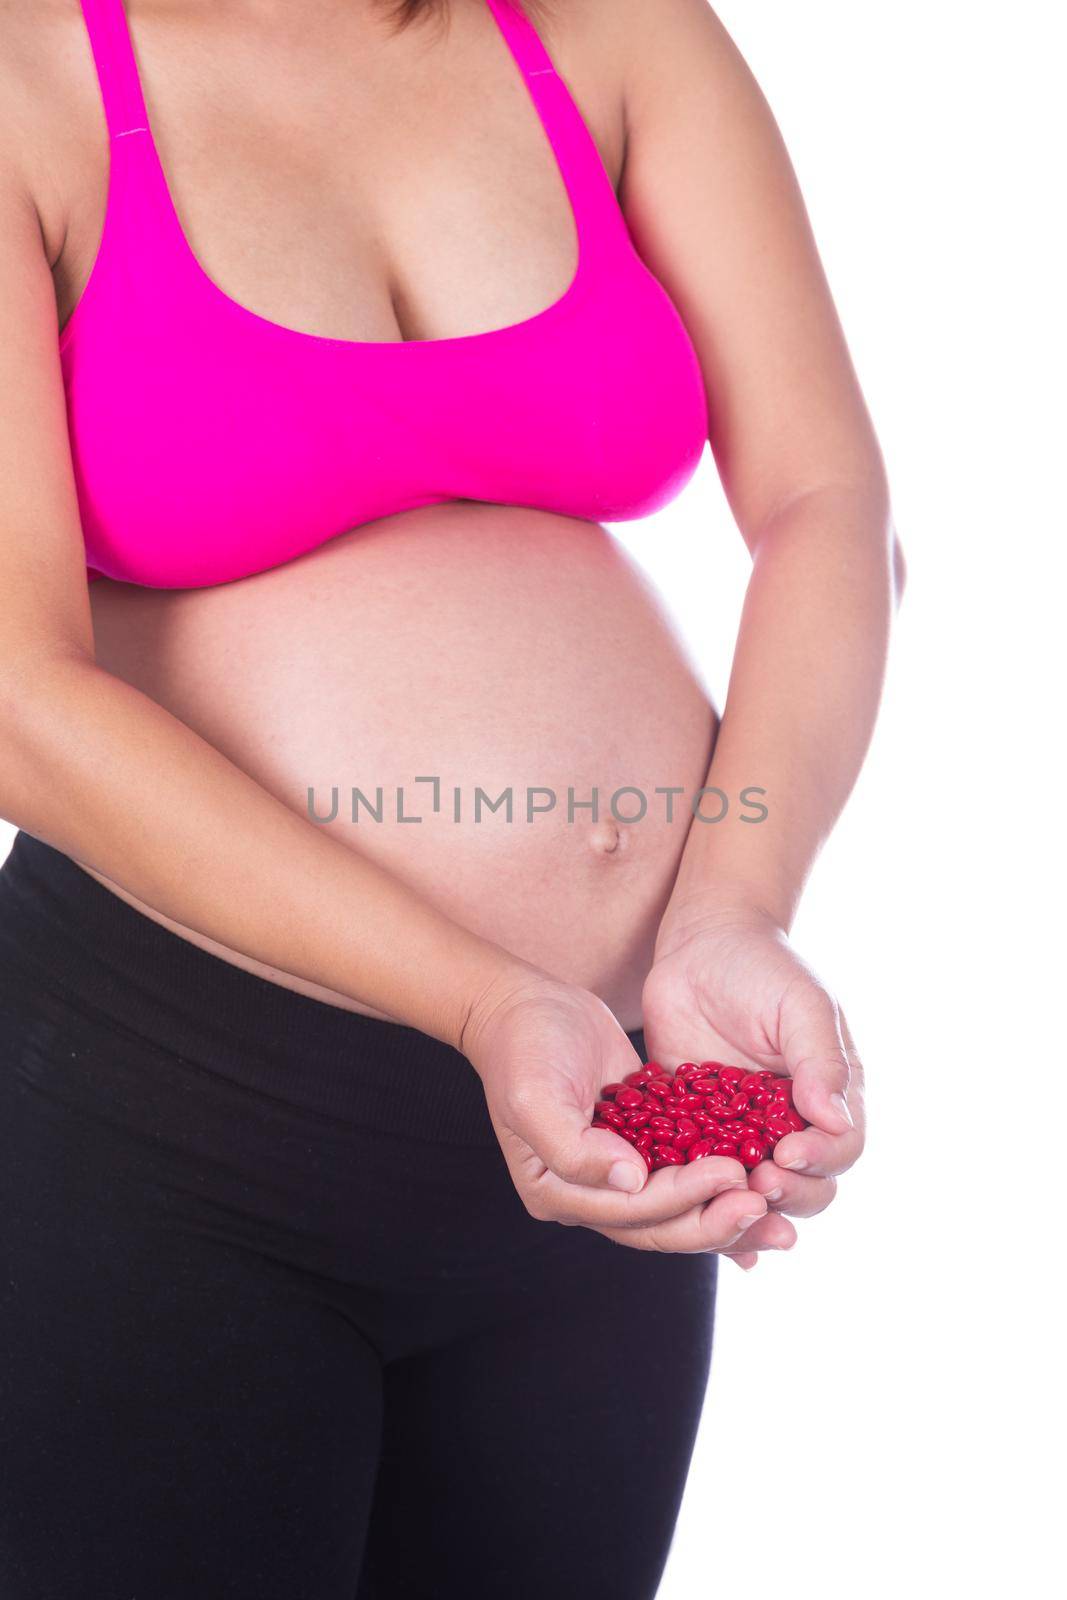 pregnant woman with red pills in her hands on white background by geargodz